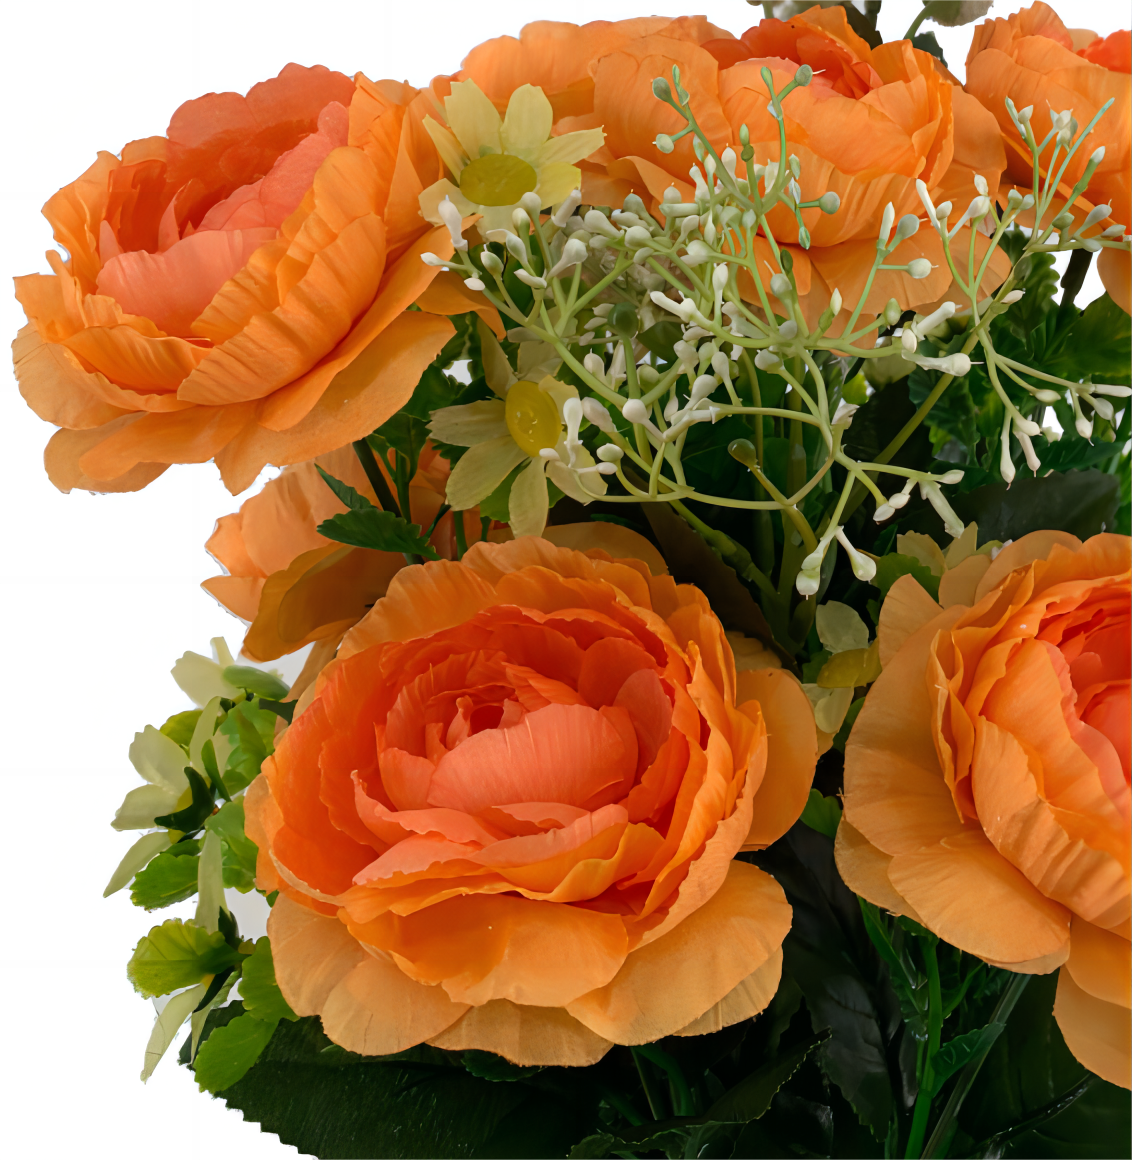 Mainstays 20.5" Artificial Flower Bouquet, Camellia, Orange Color. Indoor Use,  Party Centerpiece Table Decorations - image 3 of 5